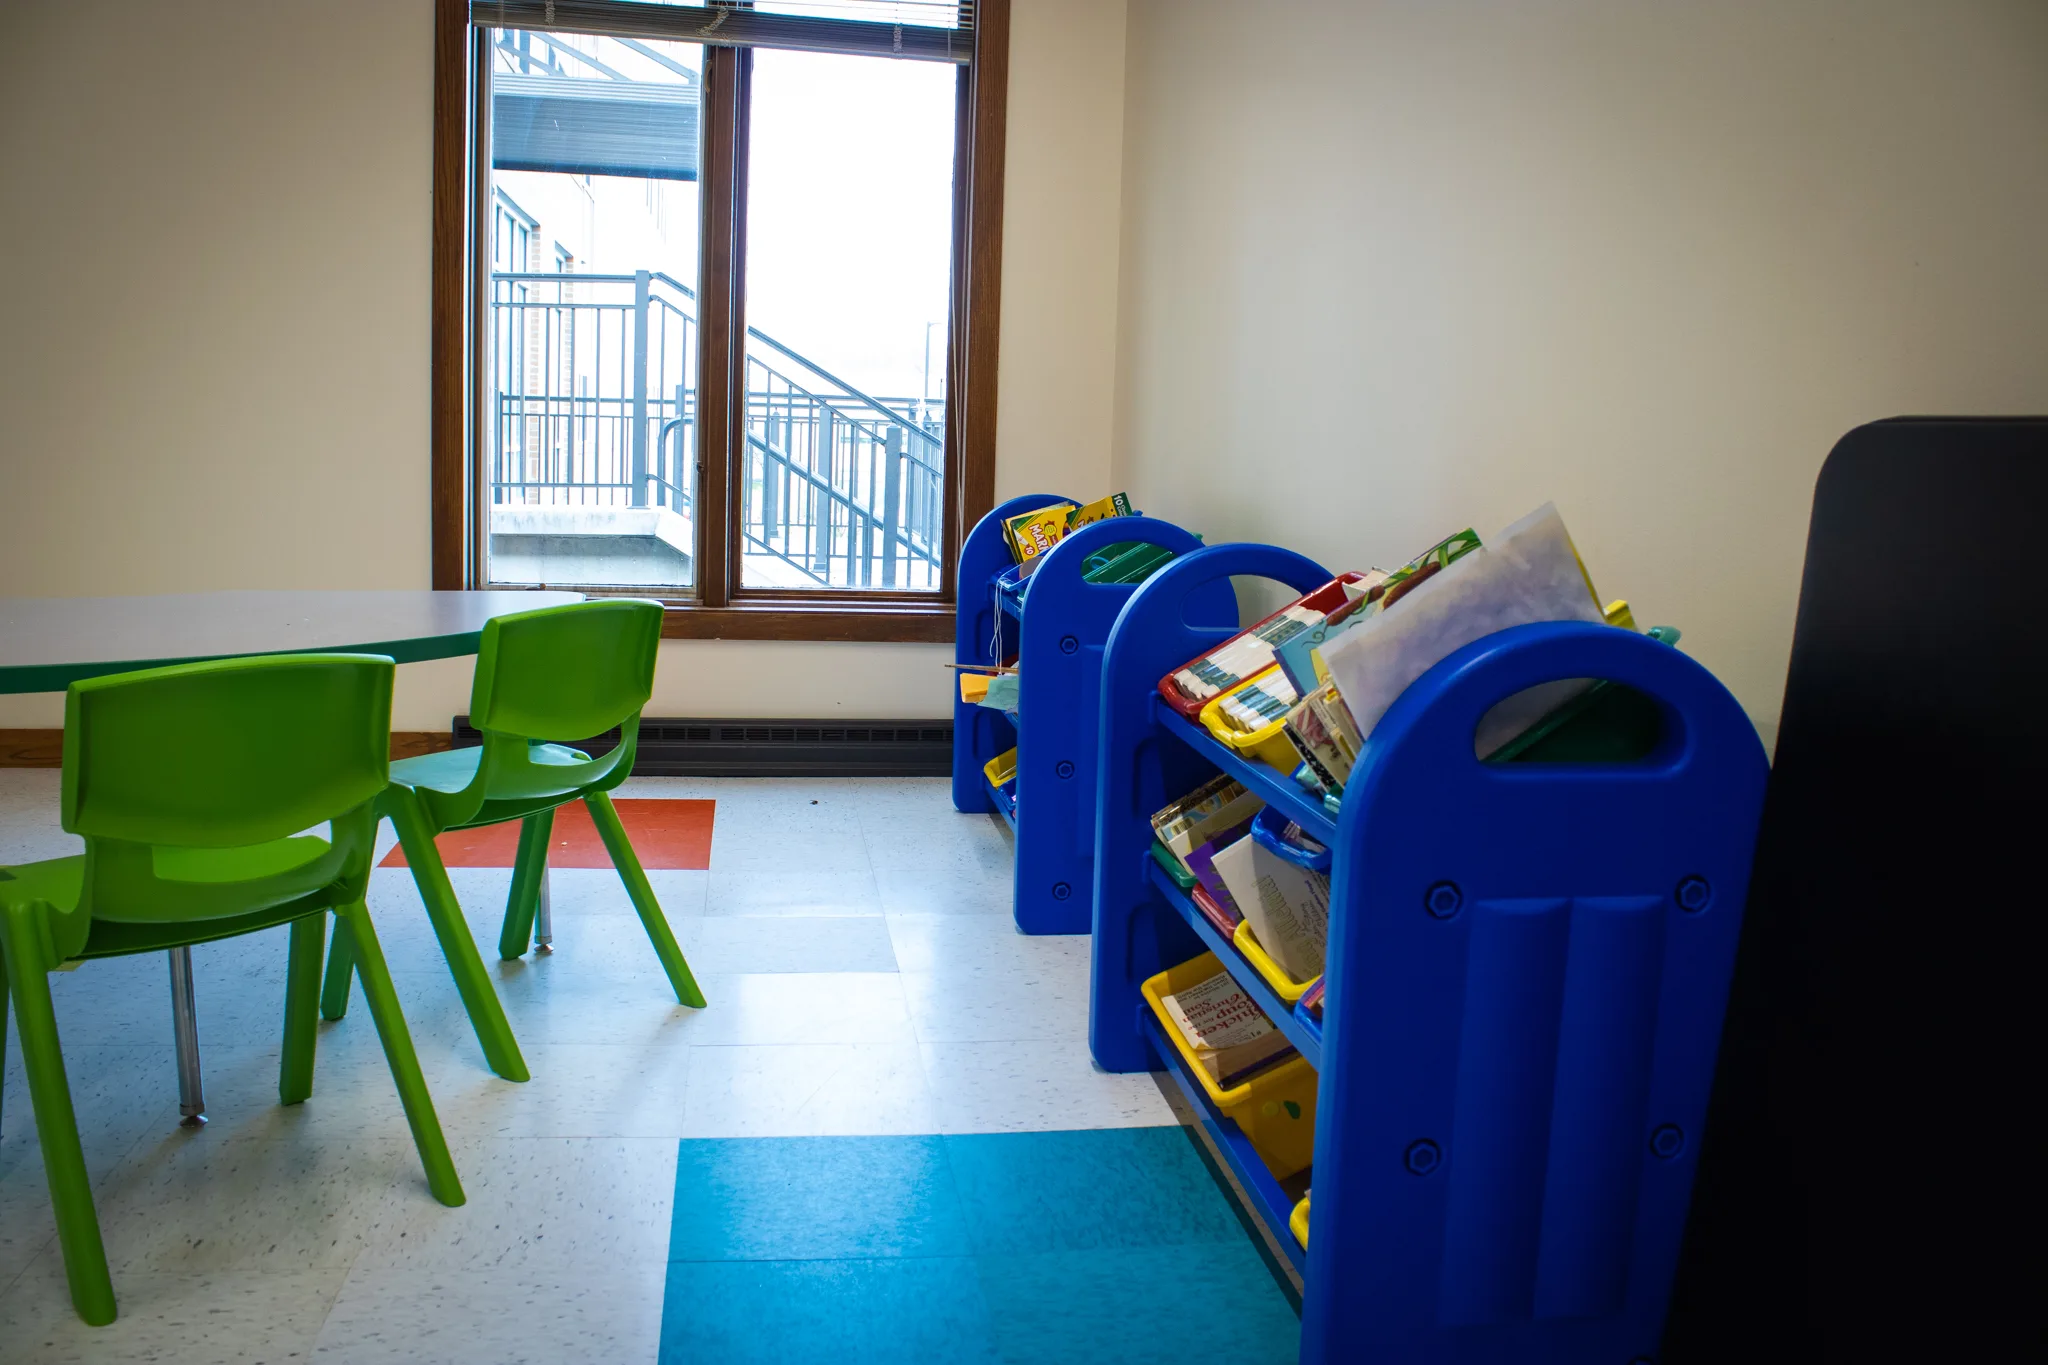 This photo is of the children's room at University Church in Kent. The church has a program for kids during and after church along with during the week.